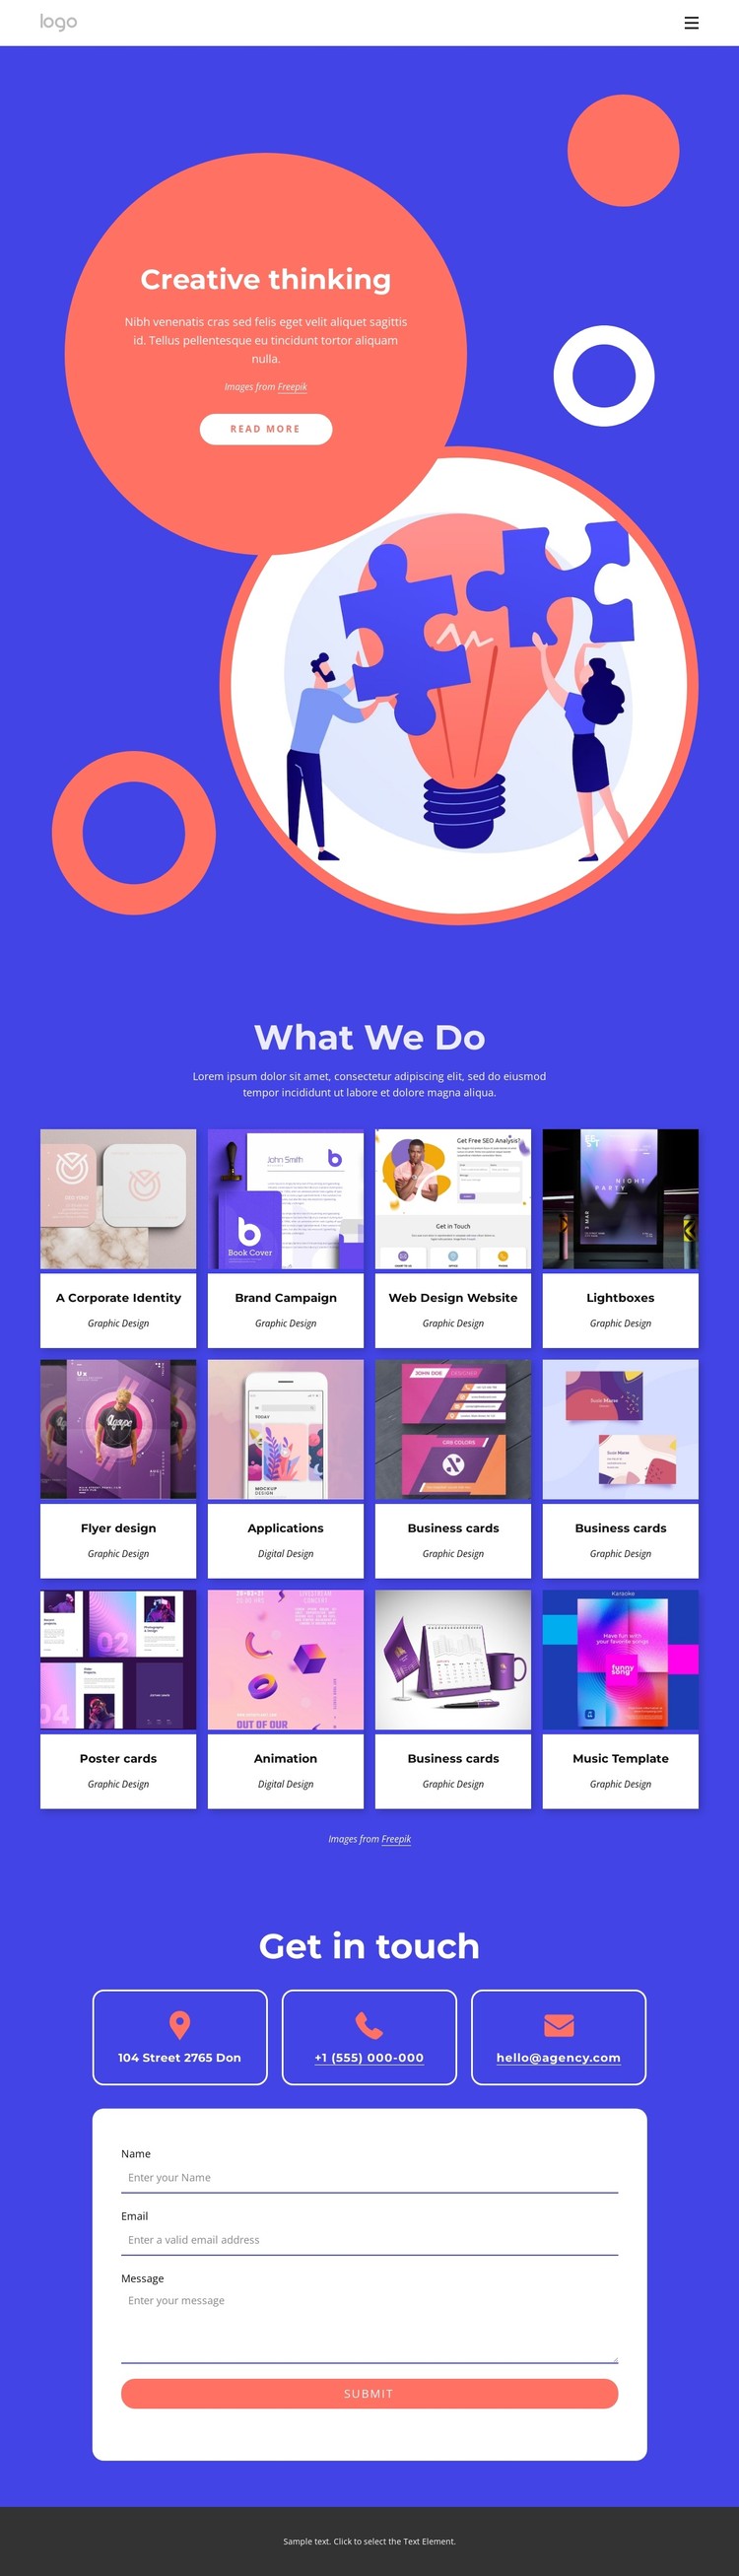 Campaigns, mobile and digital CSS Template